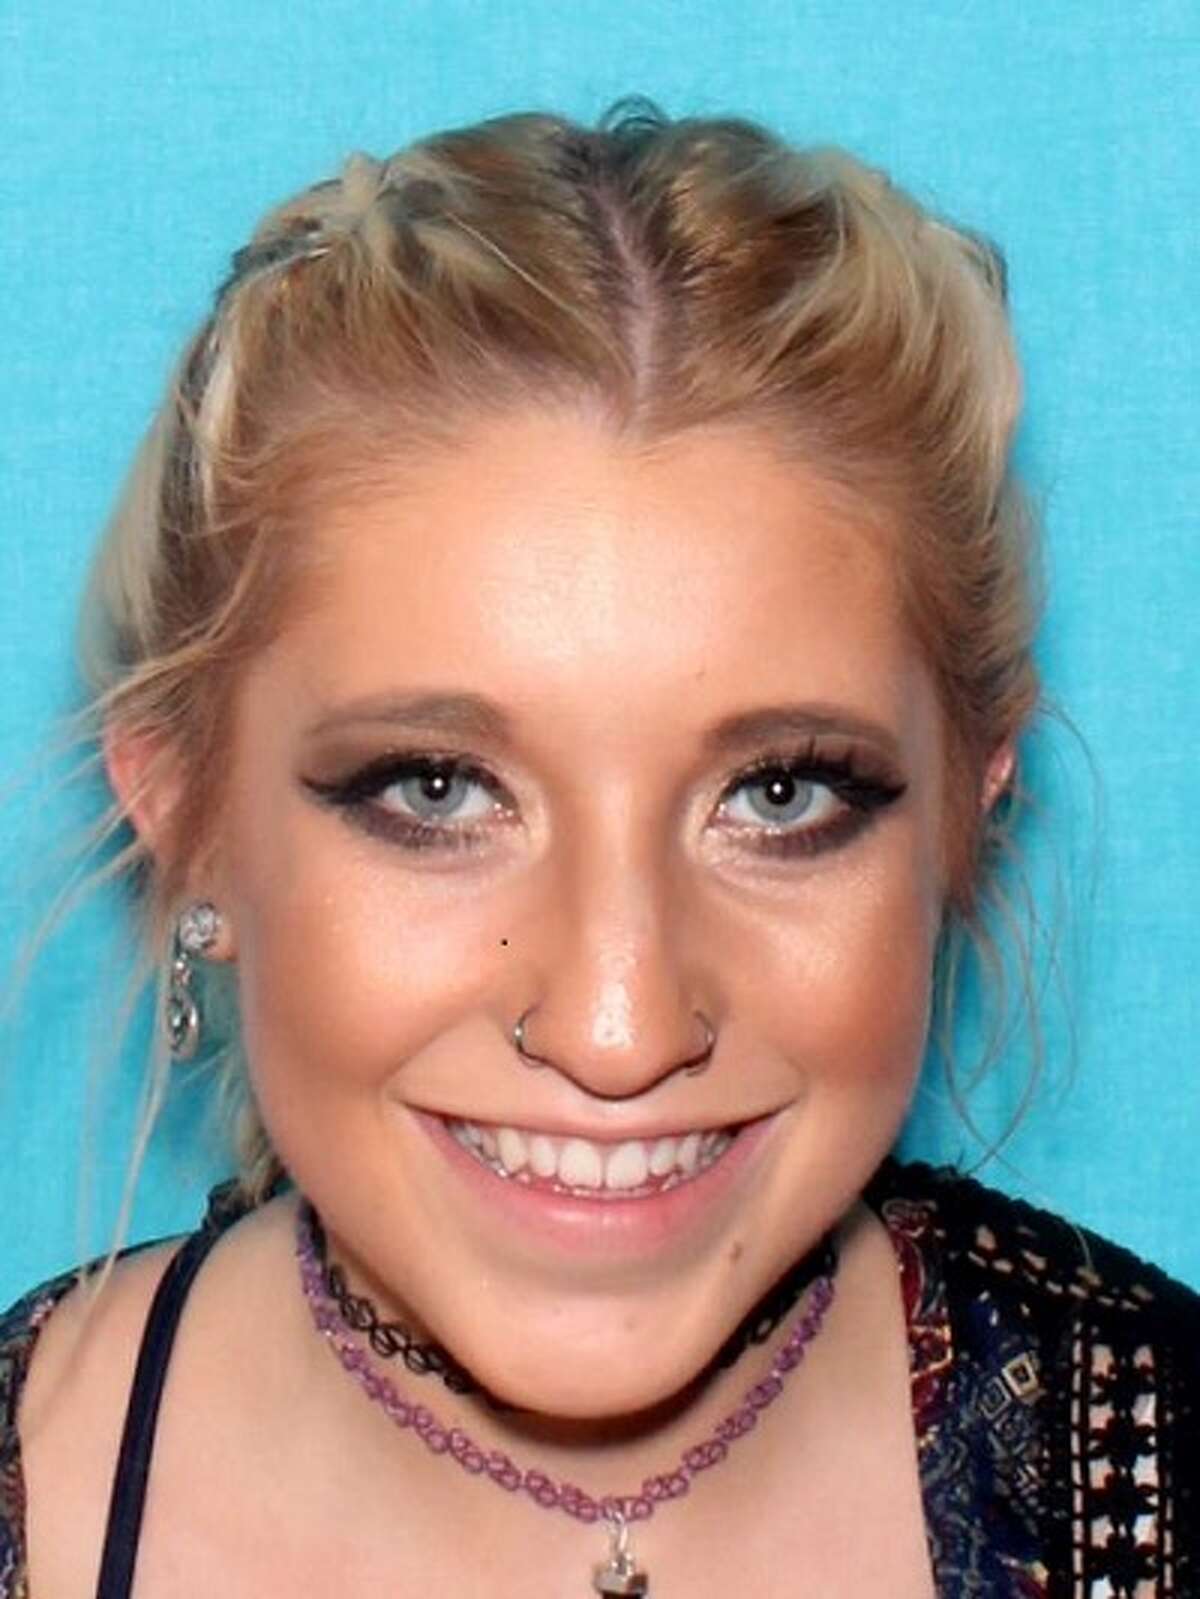 Caitlin Marie Denison, 19, was last seen on January 19. She reportedly flew to Midland from Reno, Nevada with an unidentified man, who lives in Midland, according to the Texas Department of Public Safety.